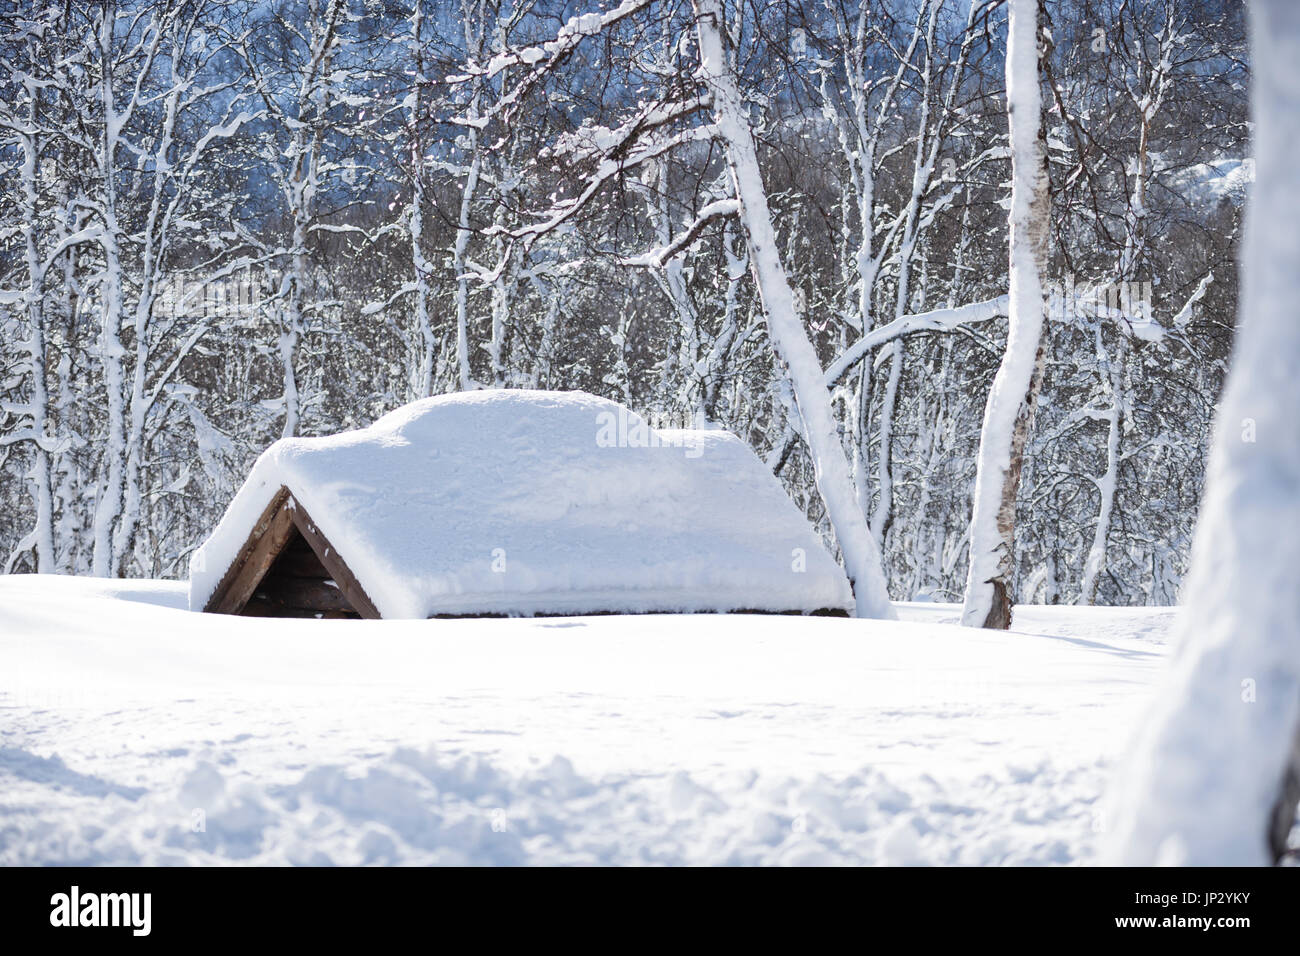 Small Building Covered In Snow Stock Photo